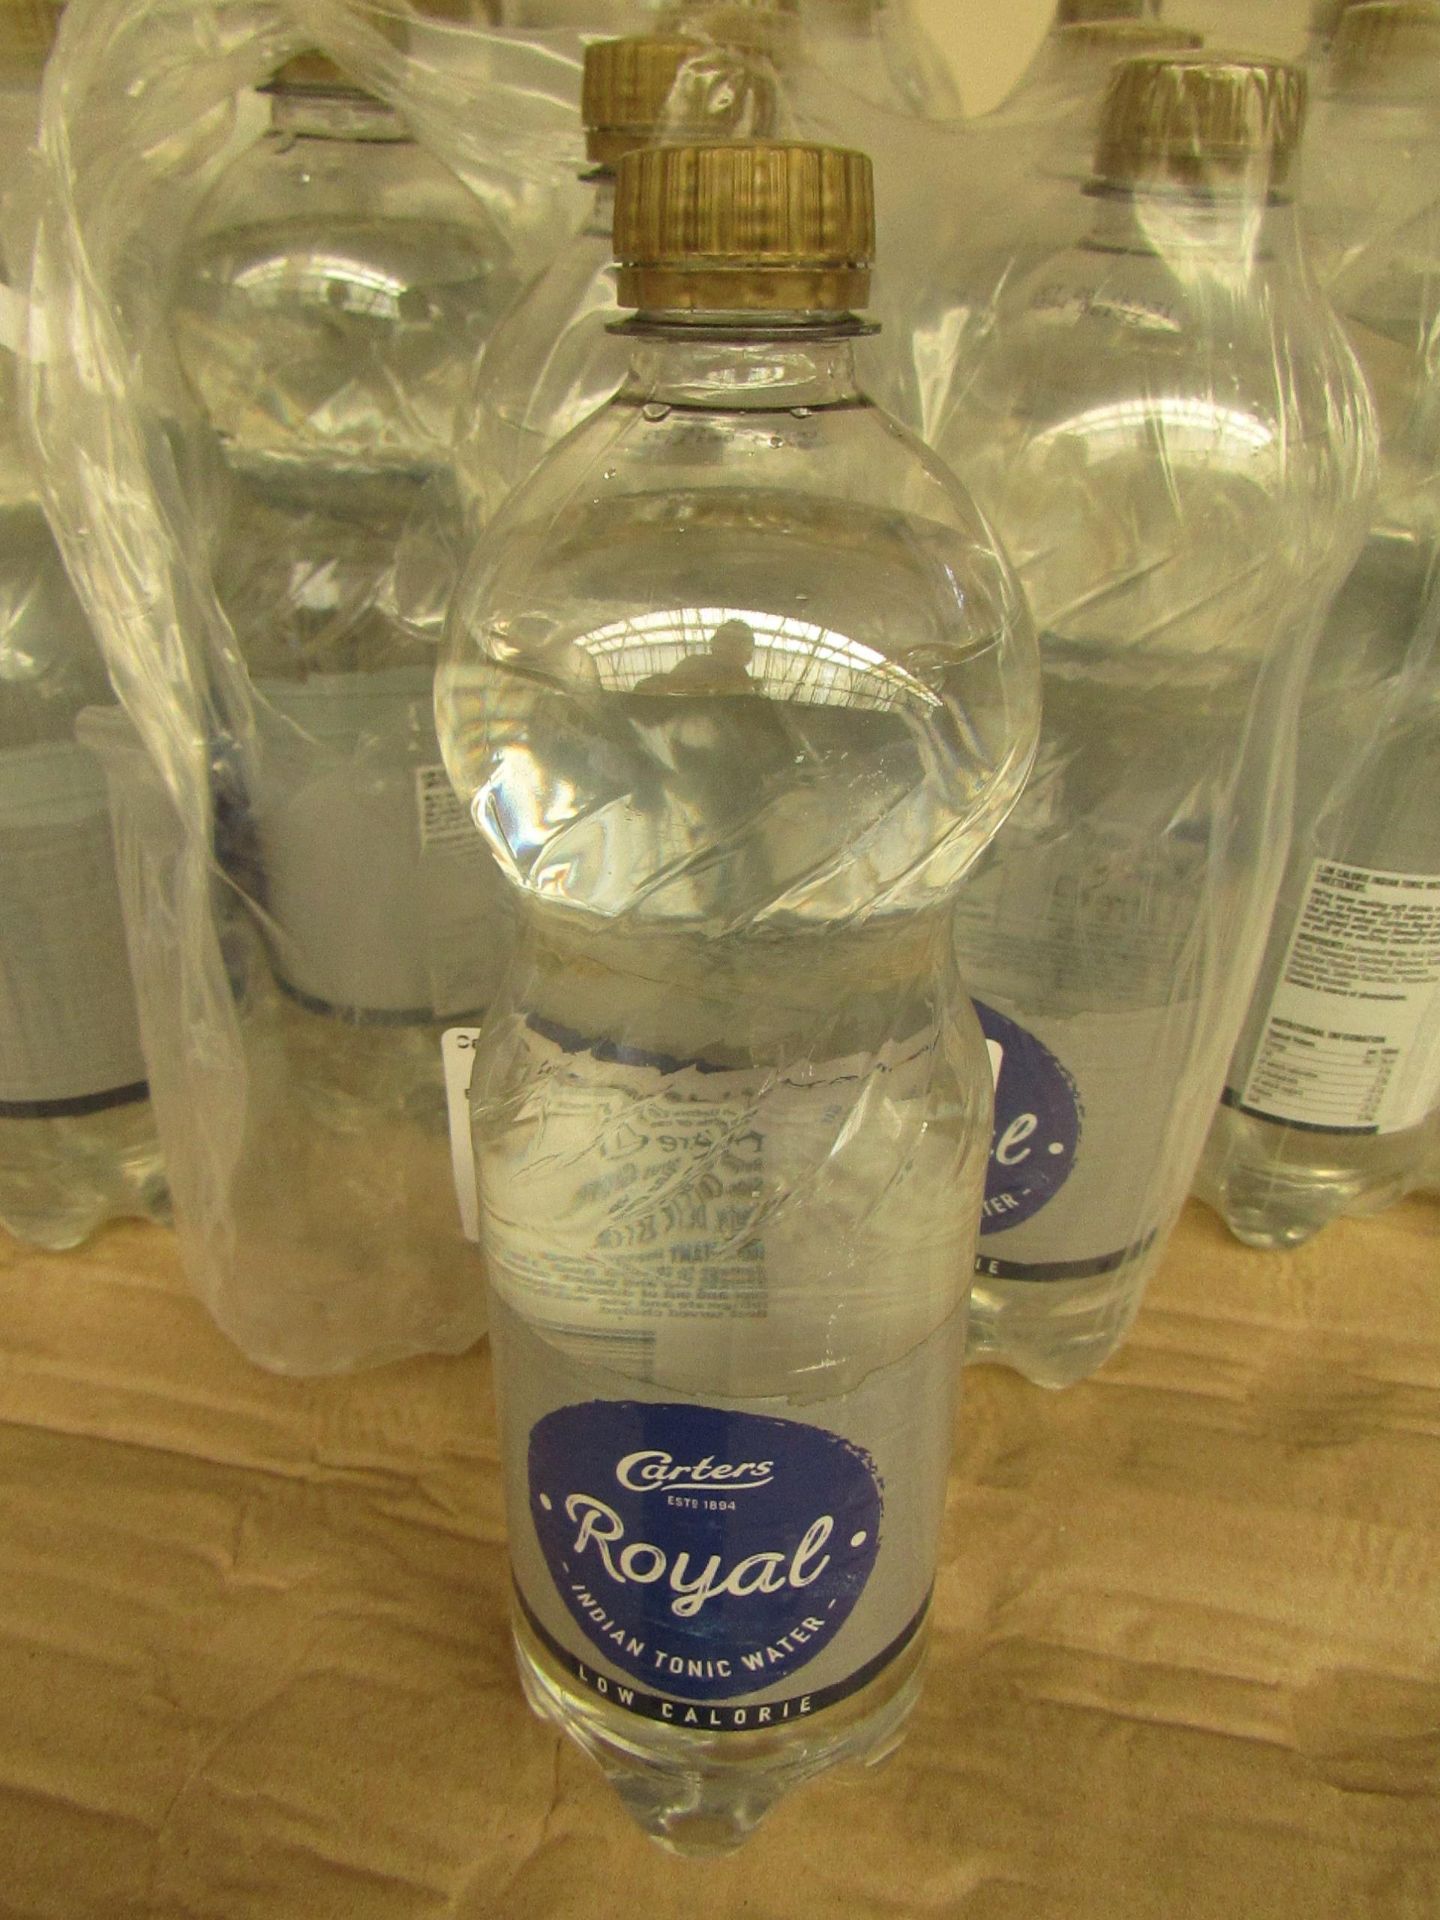 24x Carters Royal - Tonic Water (1 Litre) - All Packaged.